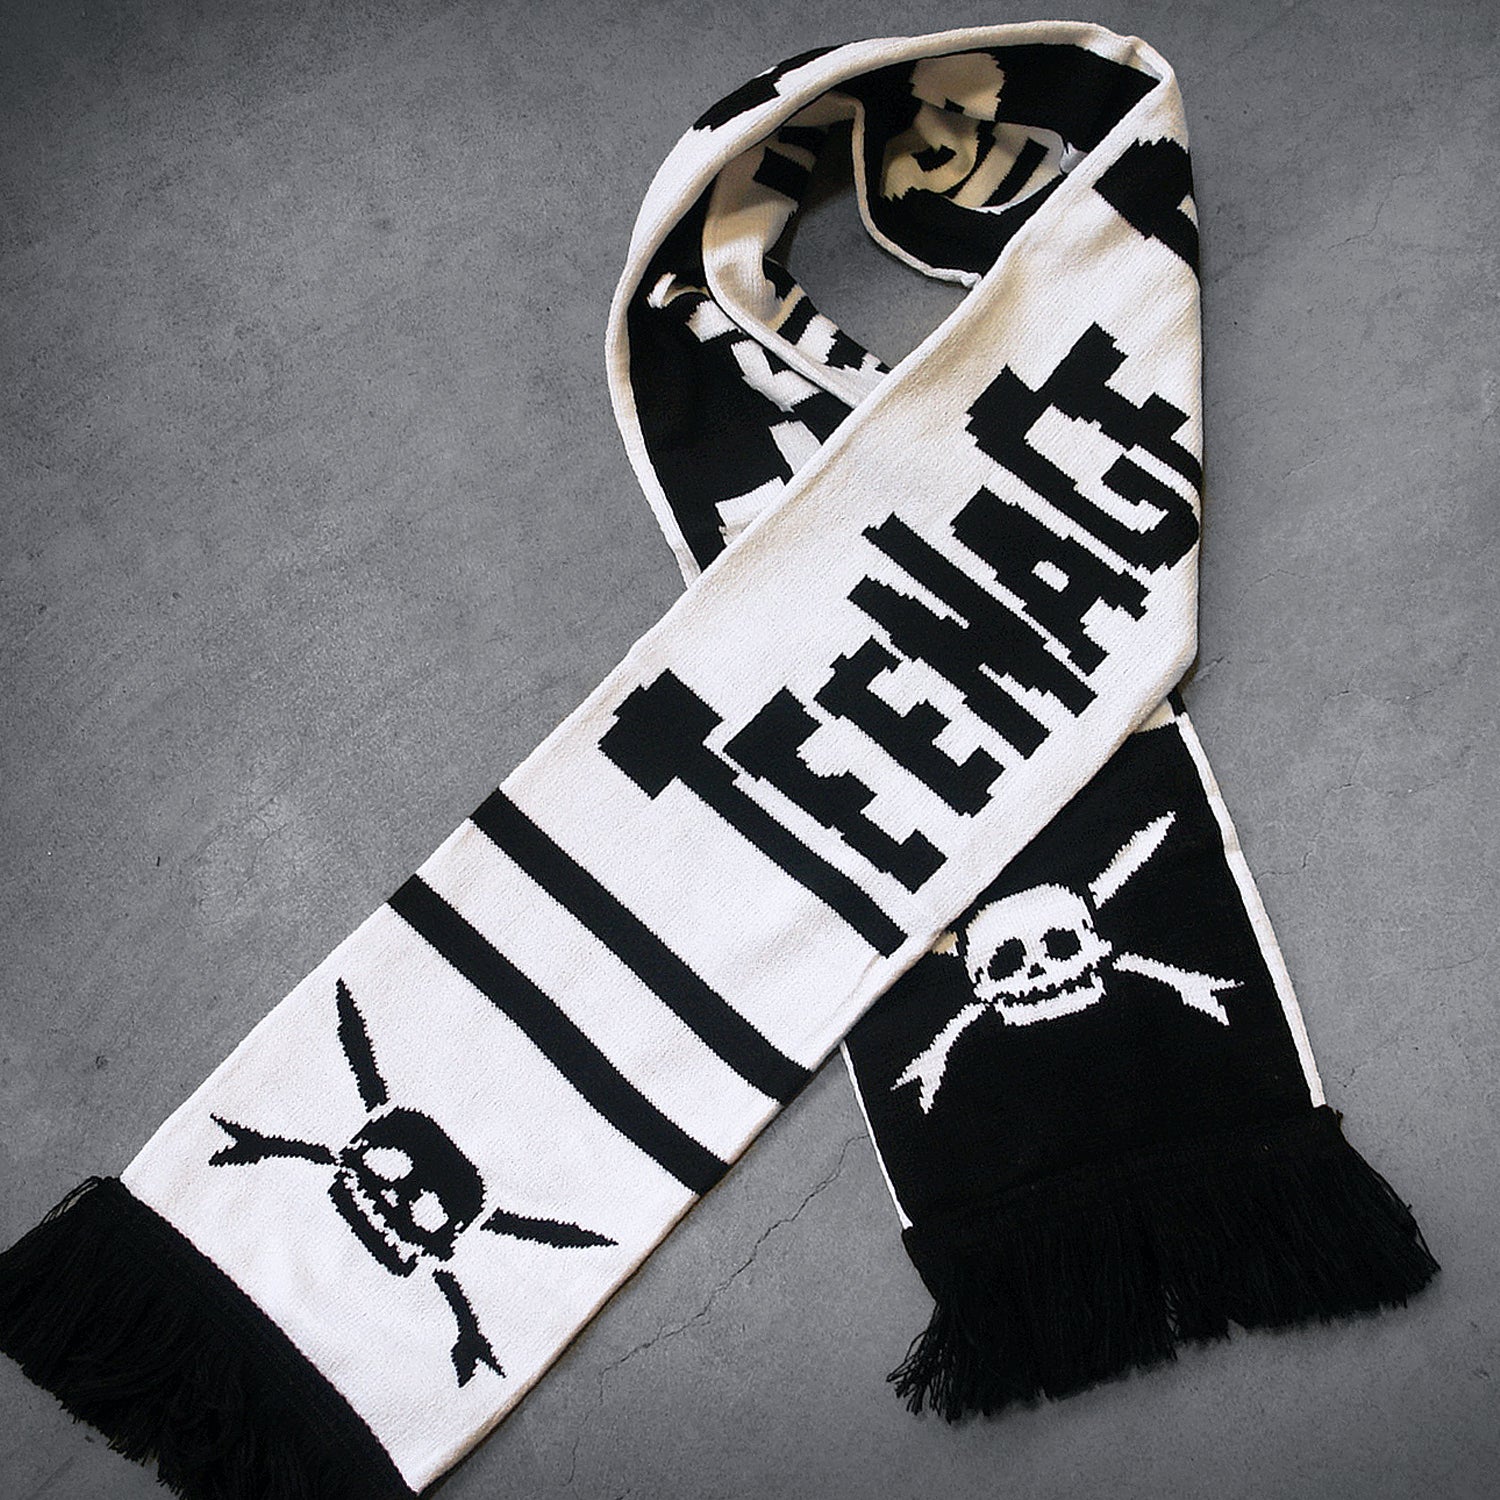 image of a wrapped up custom scarf laid on a concrete floor. the scarf is white with black text that says teenage bottle rocket and has black skulls by each fringed edge